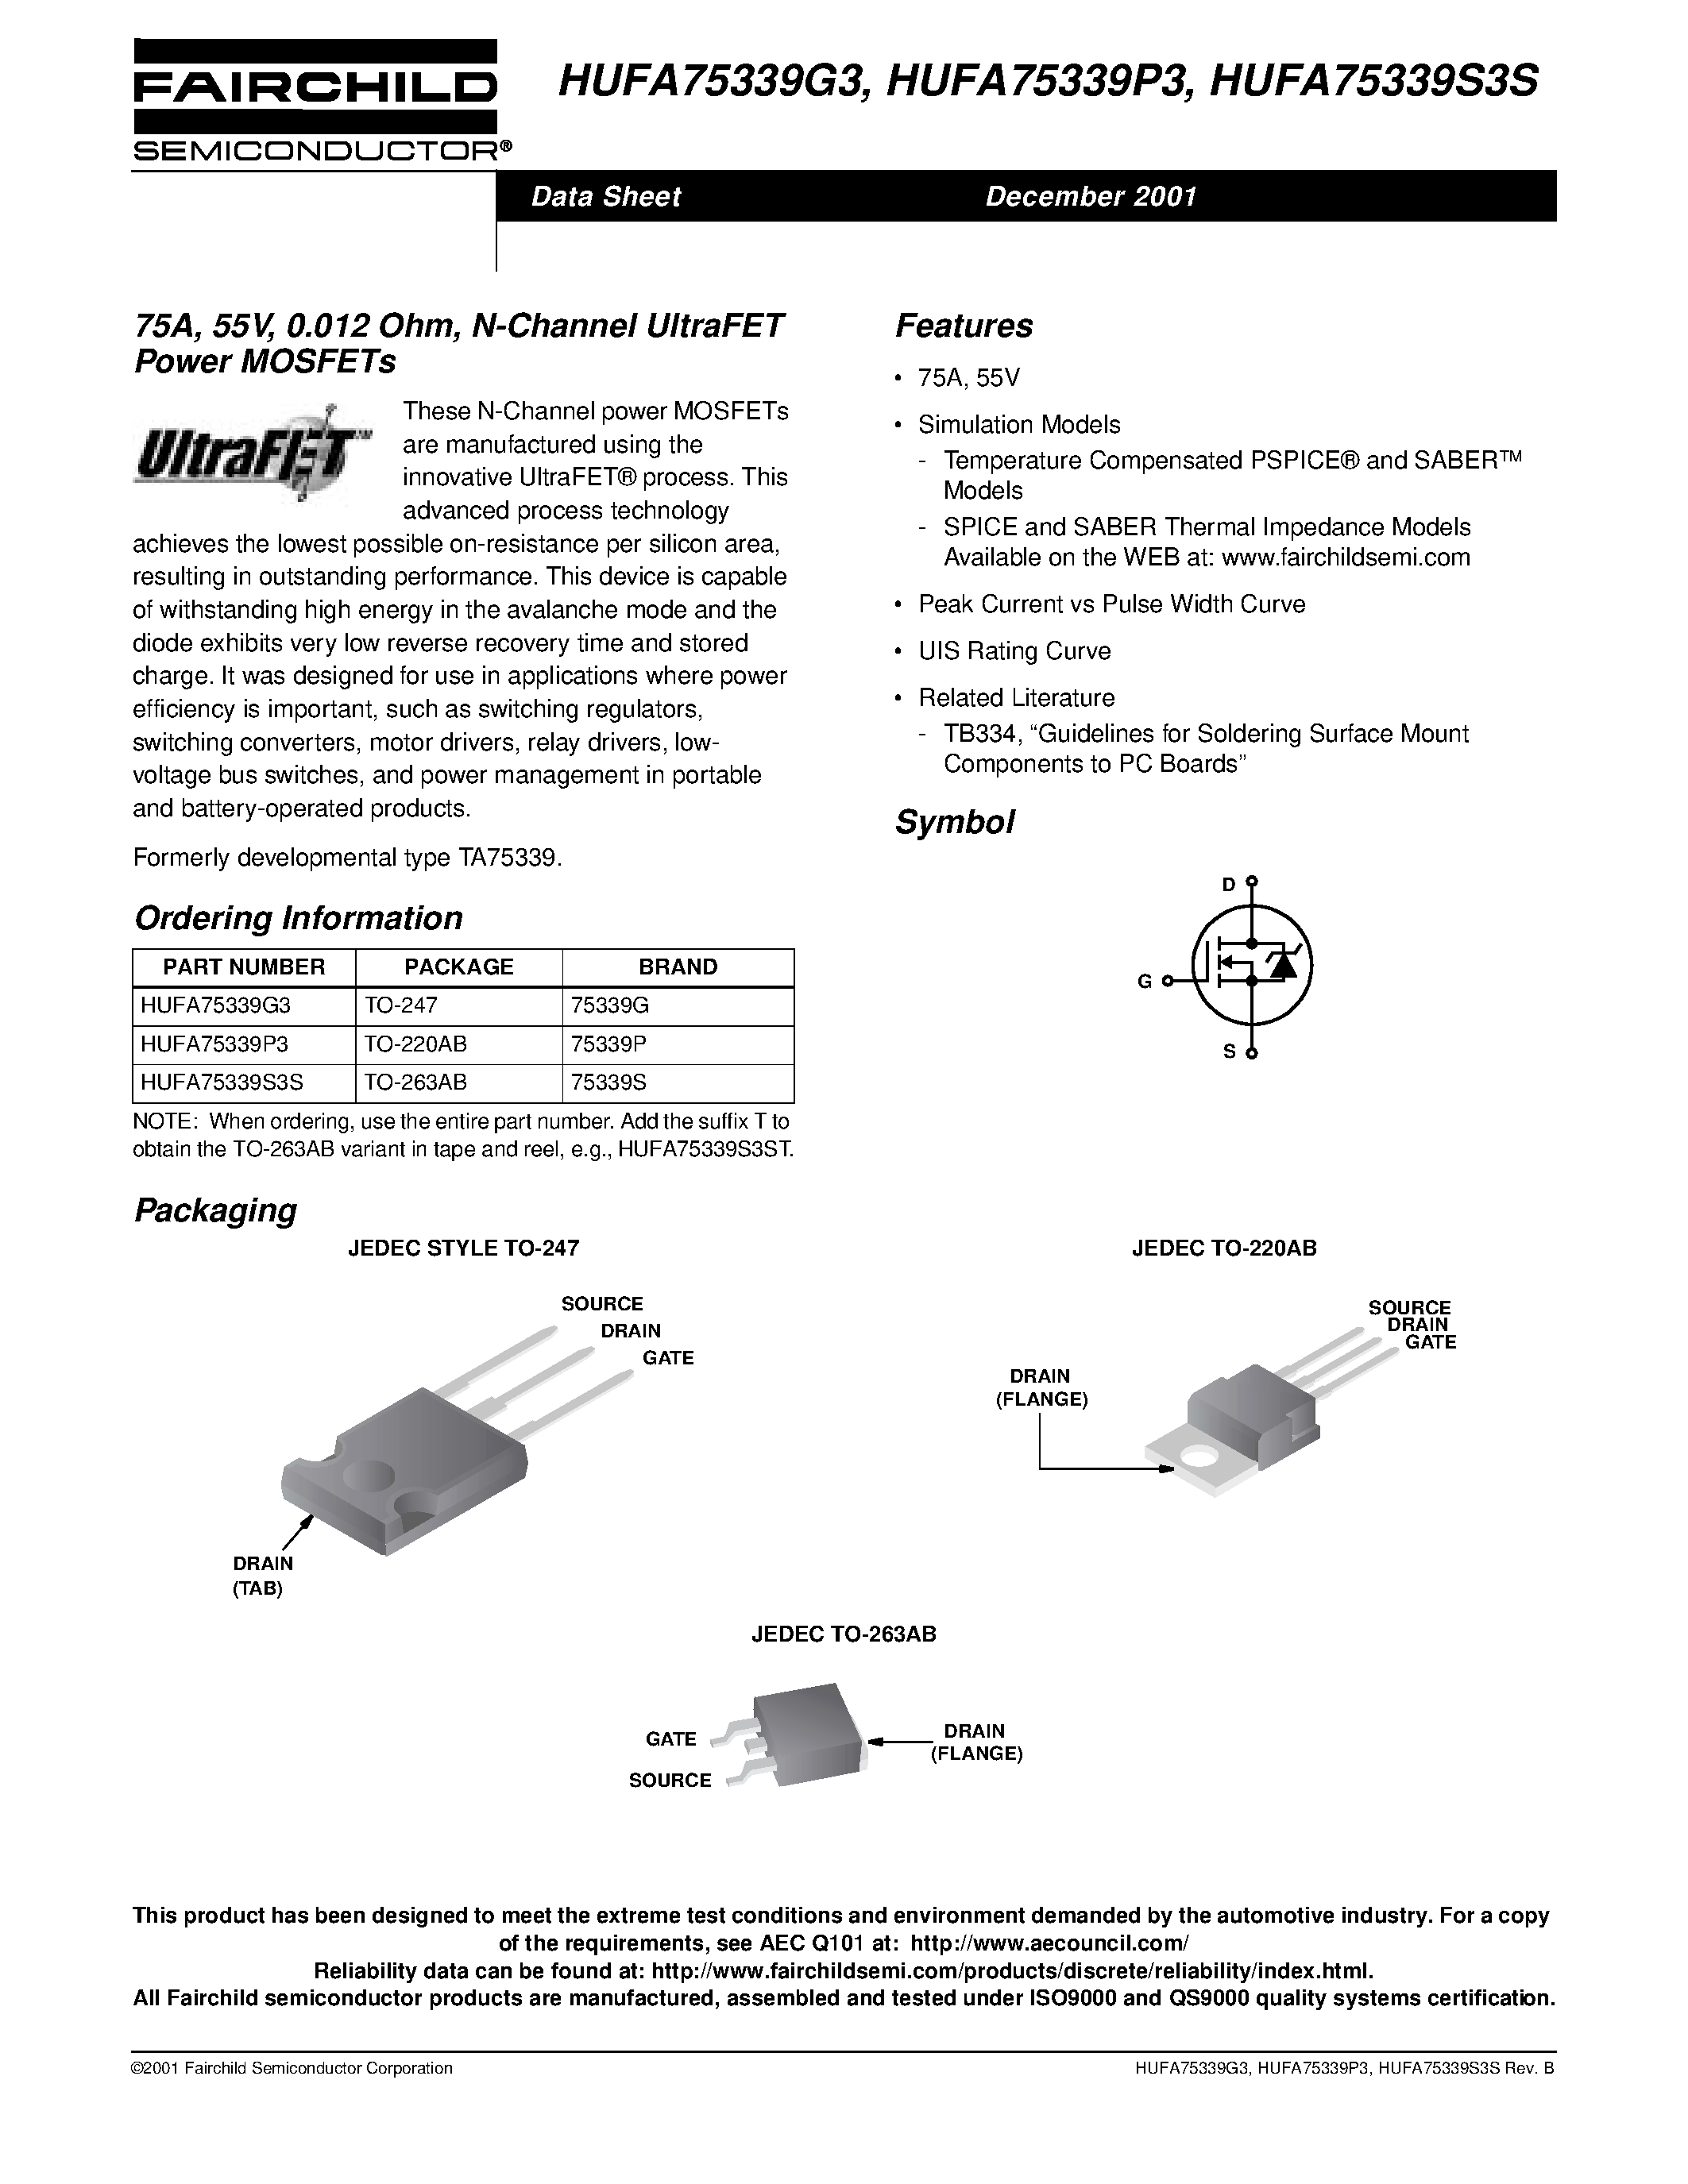 Даташит HUFA75339S3S - 75A/ 55V/ 0.012 Ohm/ N-Channel UltraFET Power MOSFETs страница 1